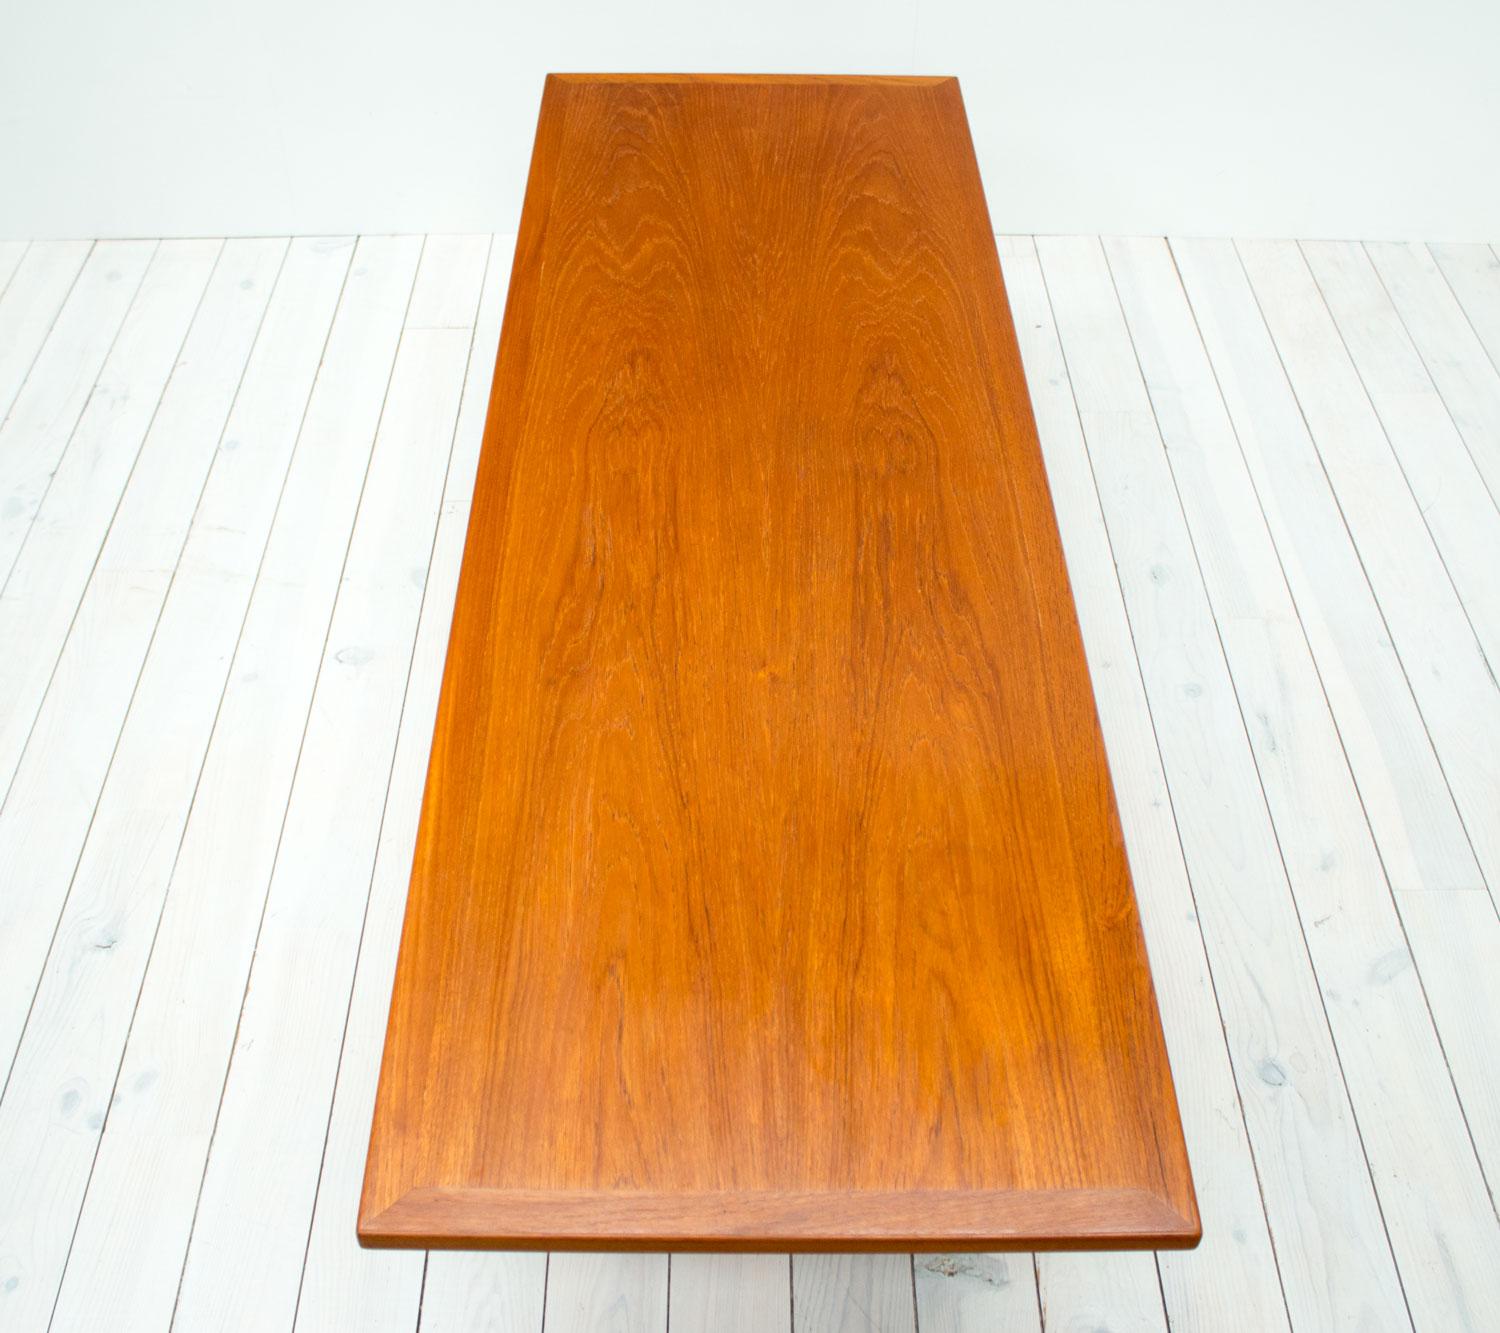 20th Century Danish Teak At-12 Coffee Table by Hans Wegner, 1950s For Sale